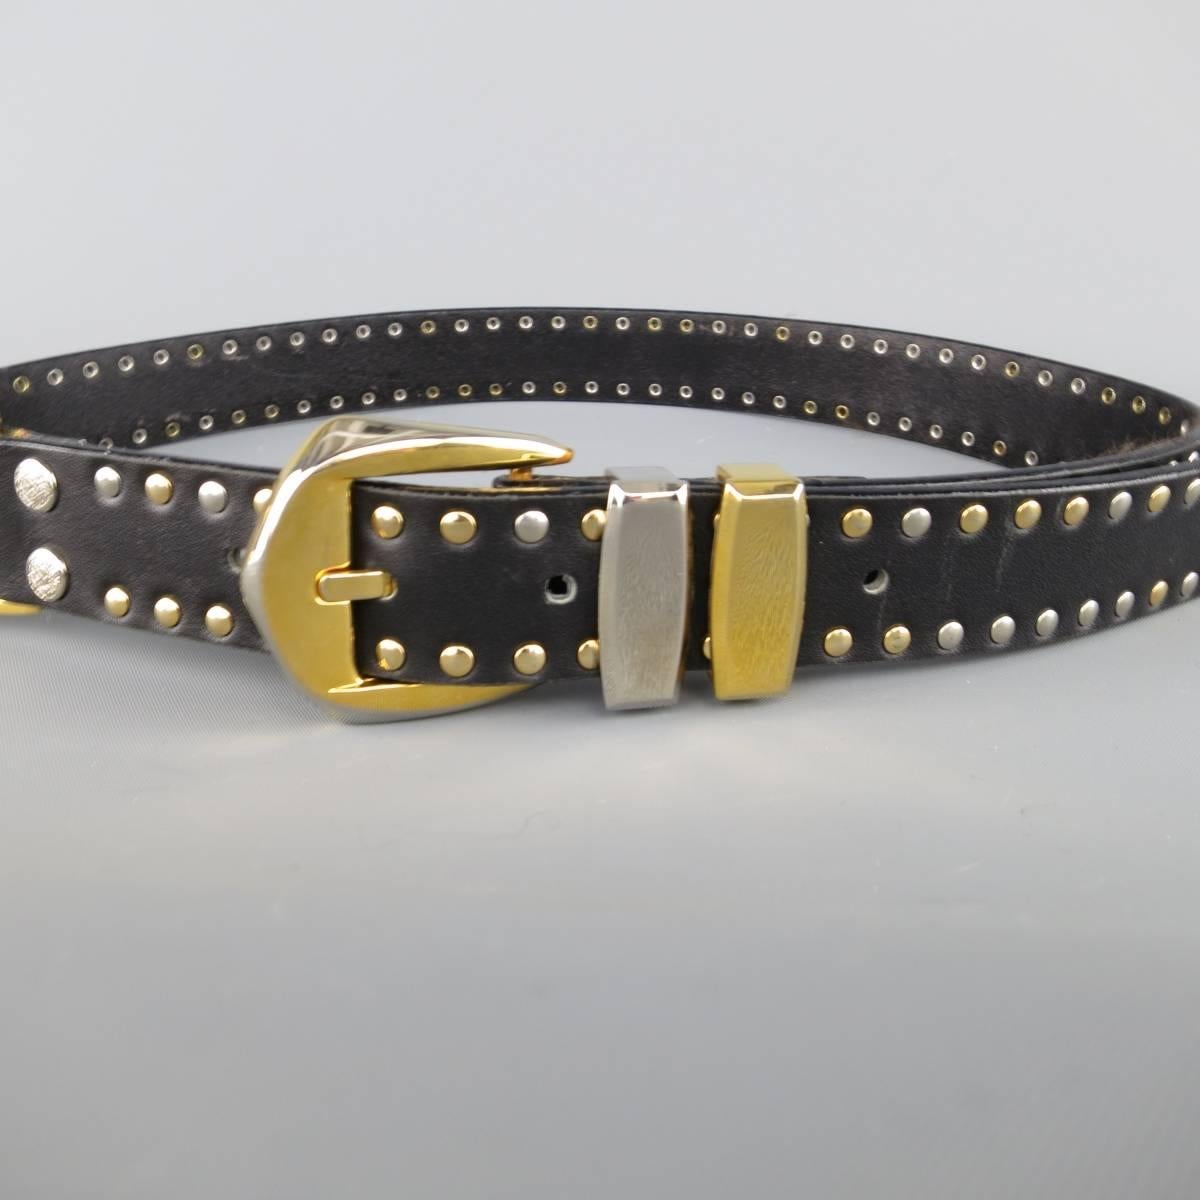 Vintage 1990's GIANNI VERSACE statement belt features a black silver & gold tone studded leather strap with Medusa emblem piece and Western style belt buckle. Made in Italy.
 
Excellent Pre-Owned Condition.
Marked: 75 / 30
 
Length: 37